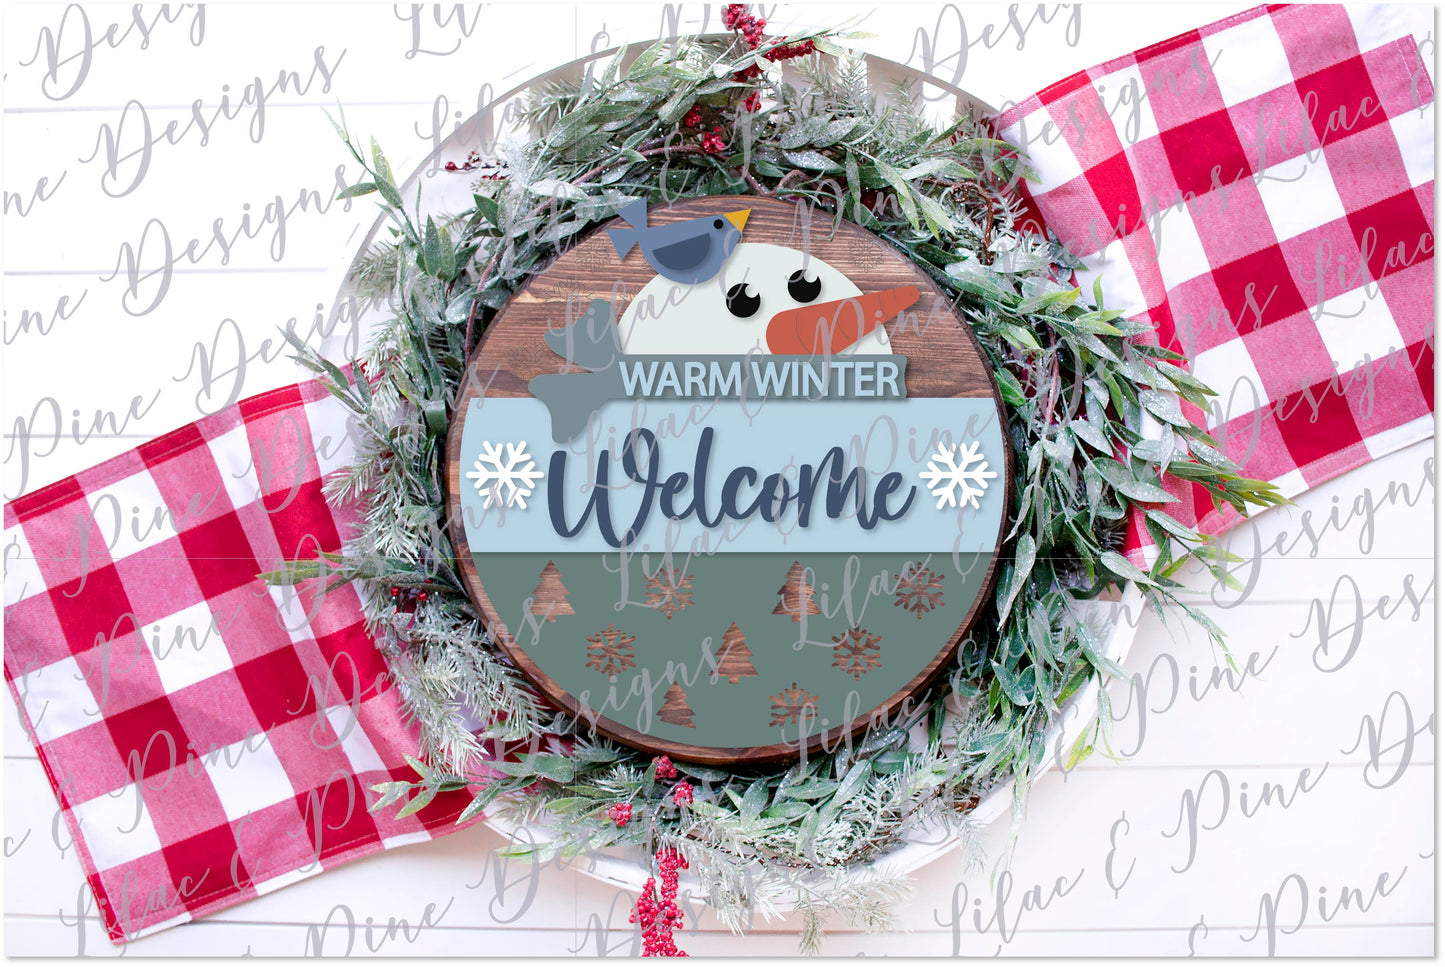 Warm Winter Welcome sign SVG, Snowman Welcome SVG, Winter decor SVG, Snowman porch sign SVG, Winter round sign, laser cut file, Glowforge SVG